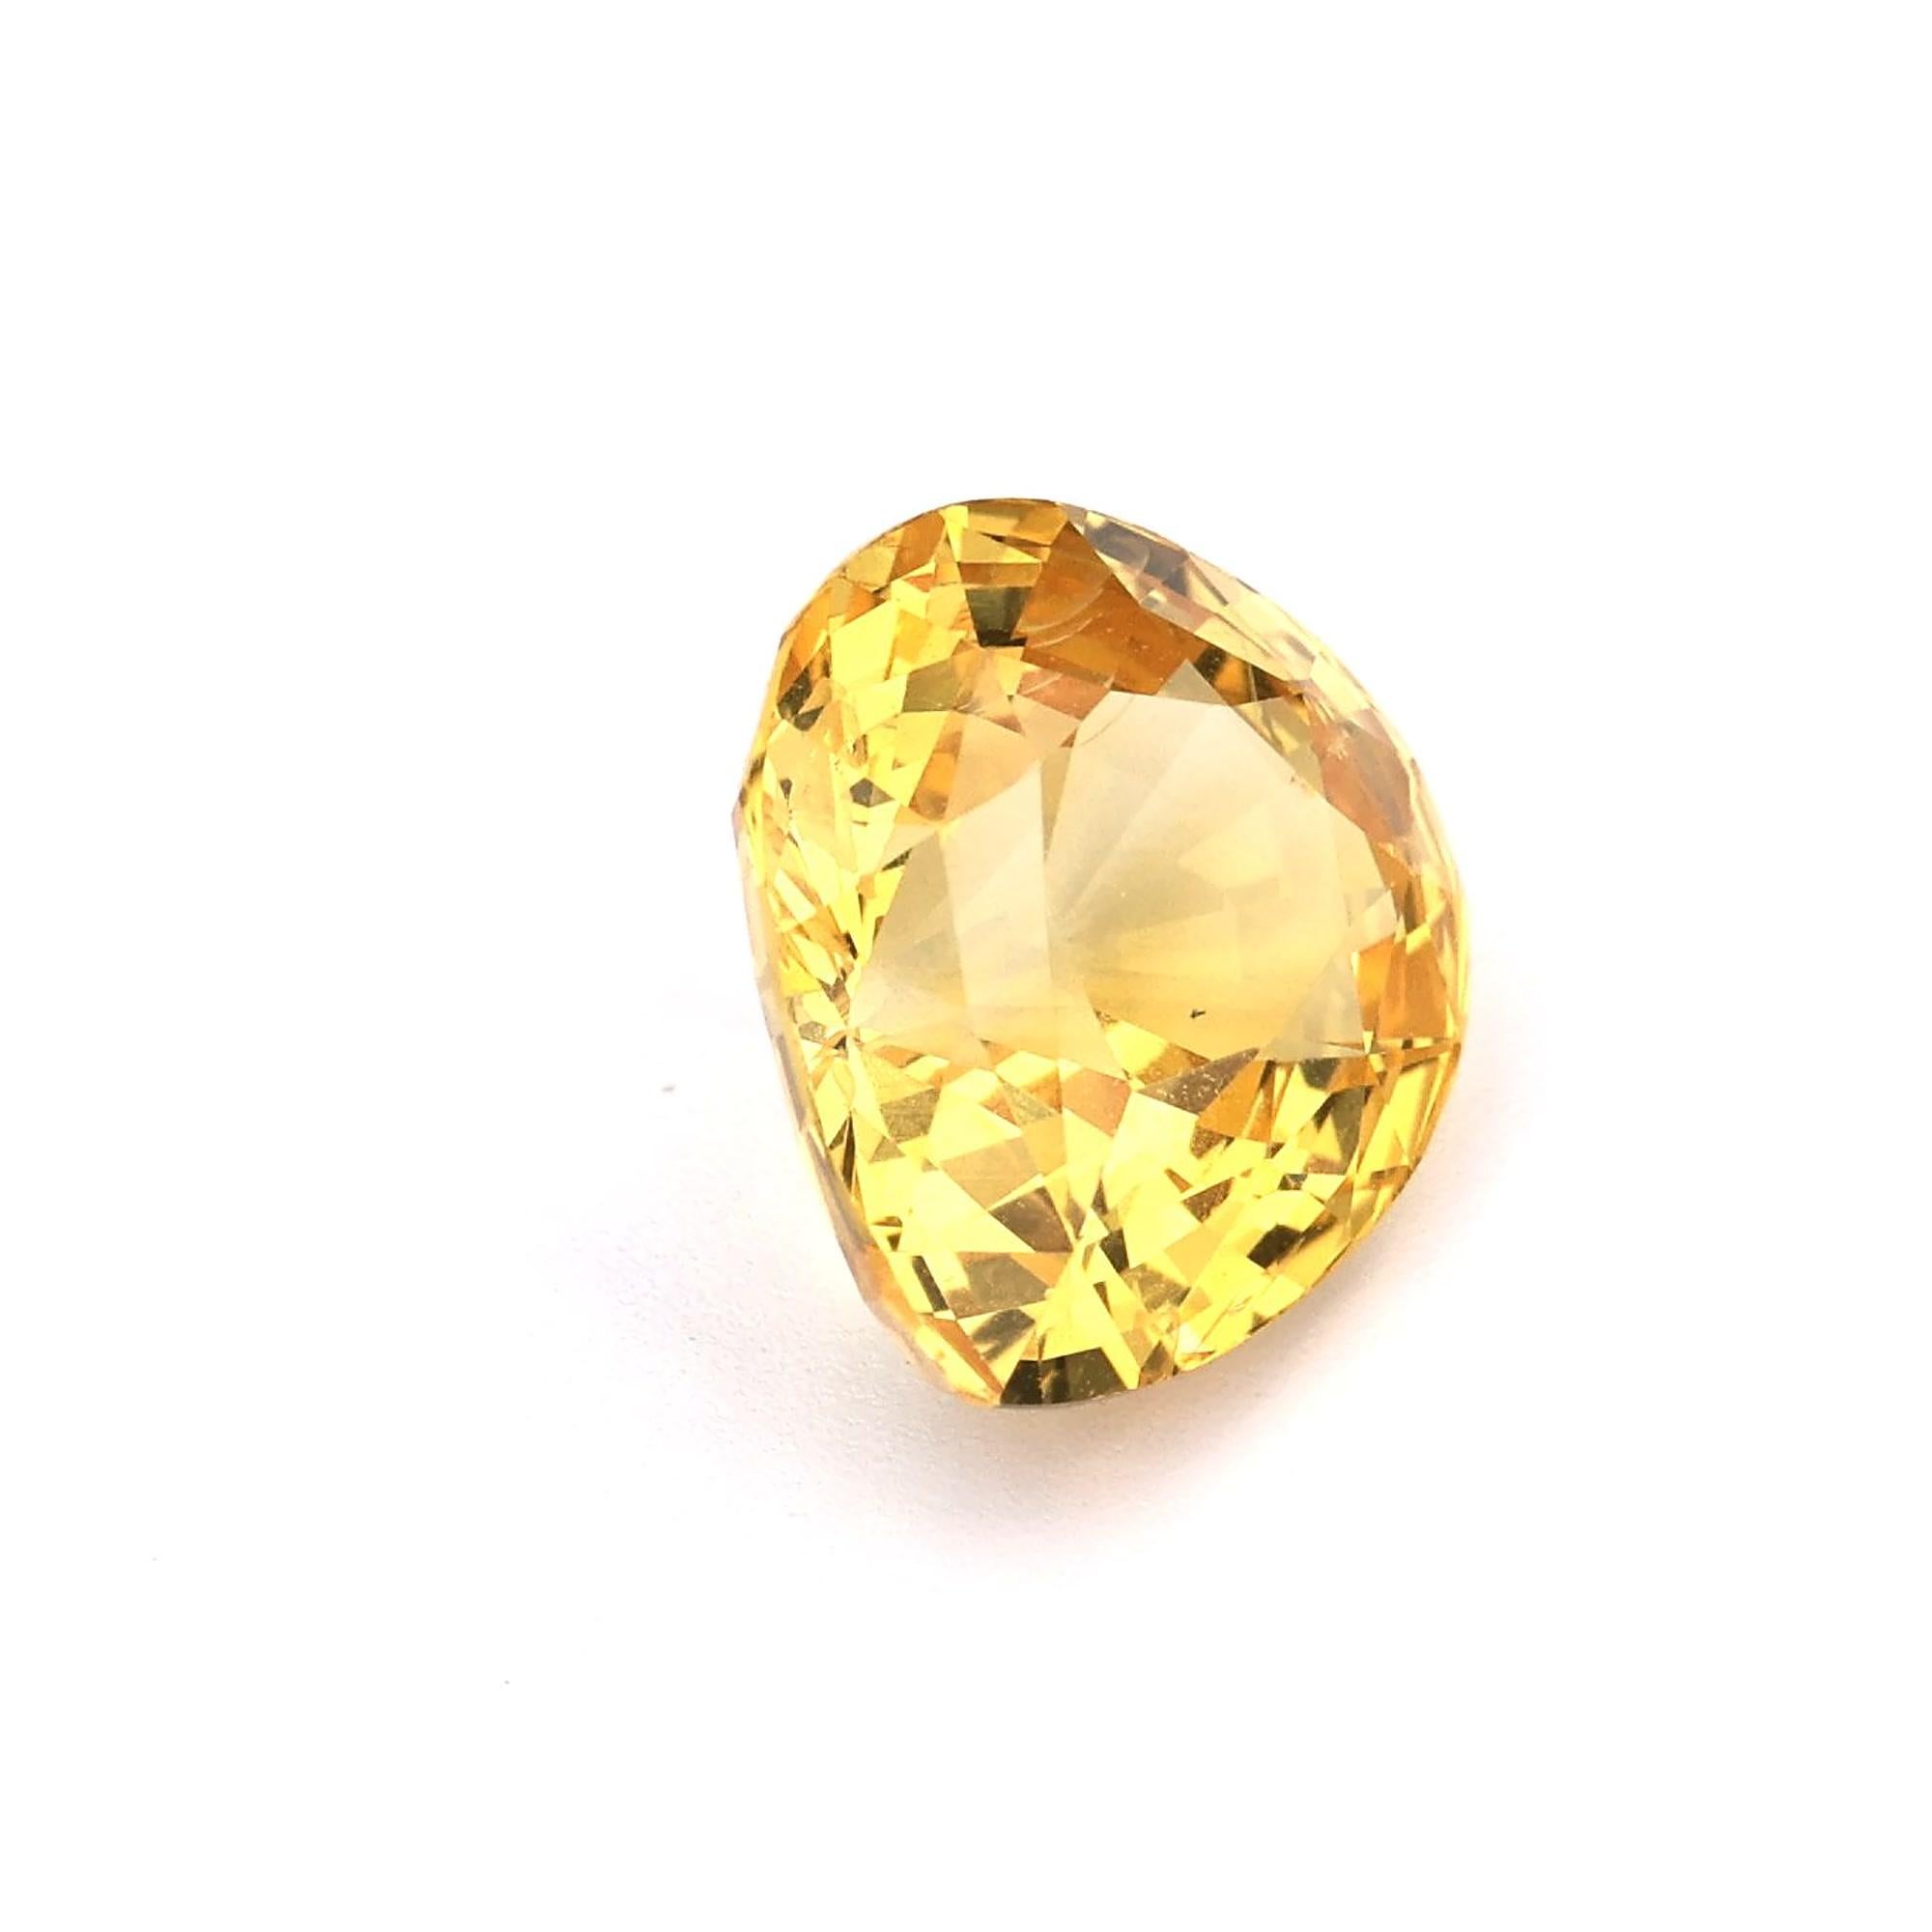 Certified 4.45 ct Natural Yellow Sapphire Pear Shape Ceylon Origin Ring Stone For Sale 3